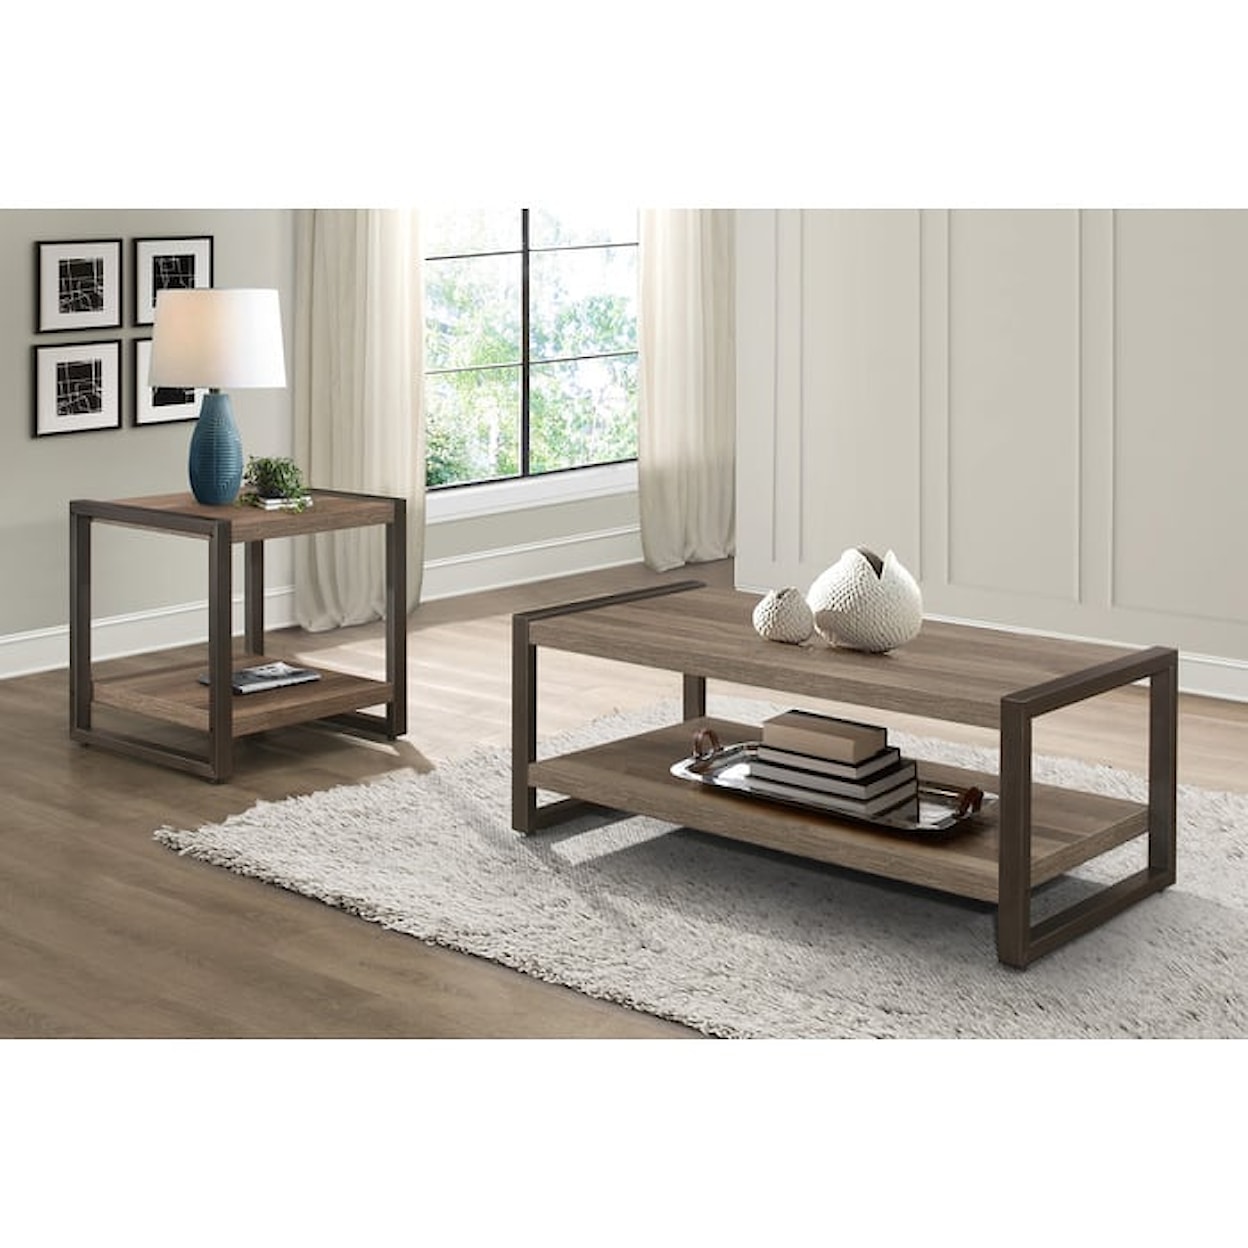 Homelegance Dogue End Table